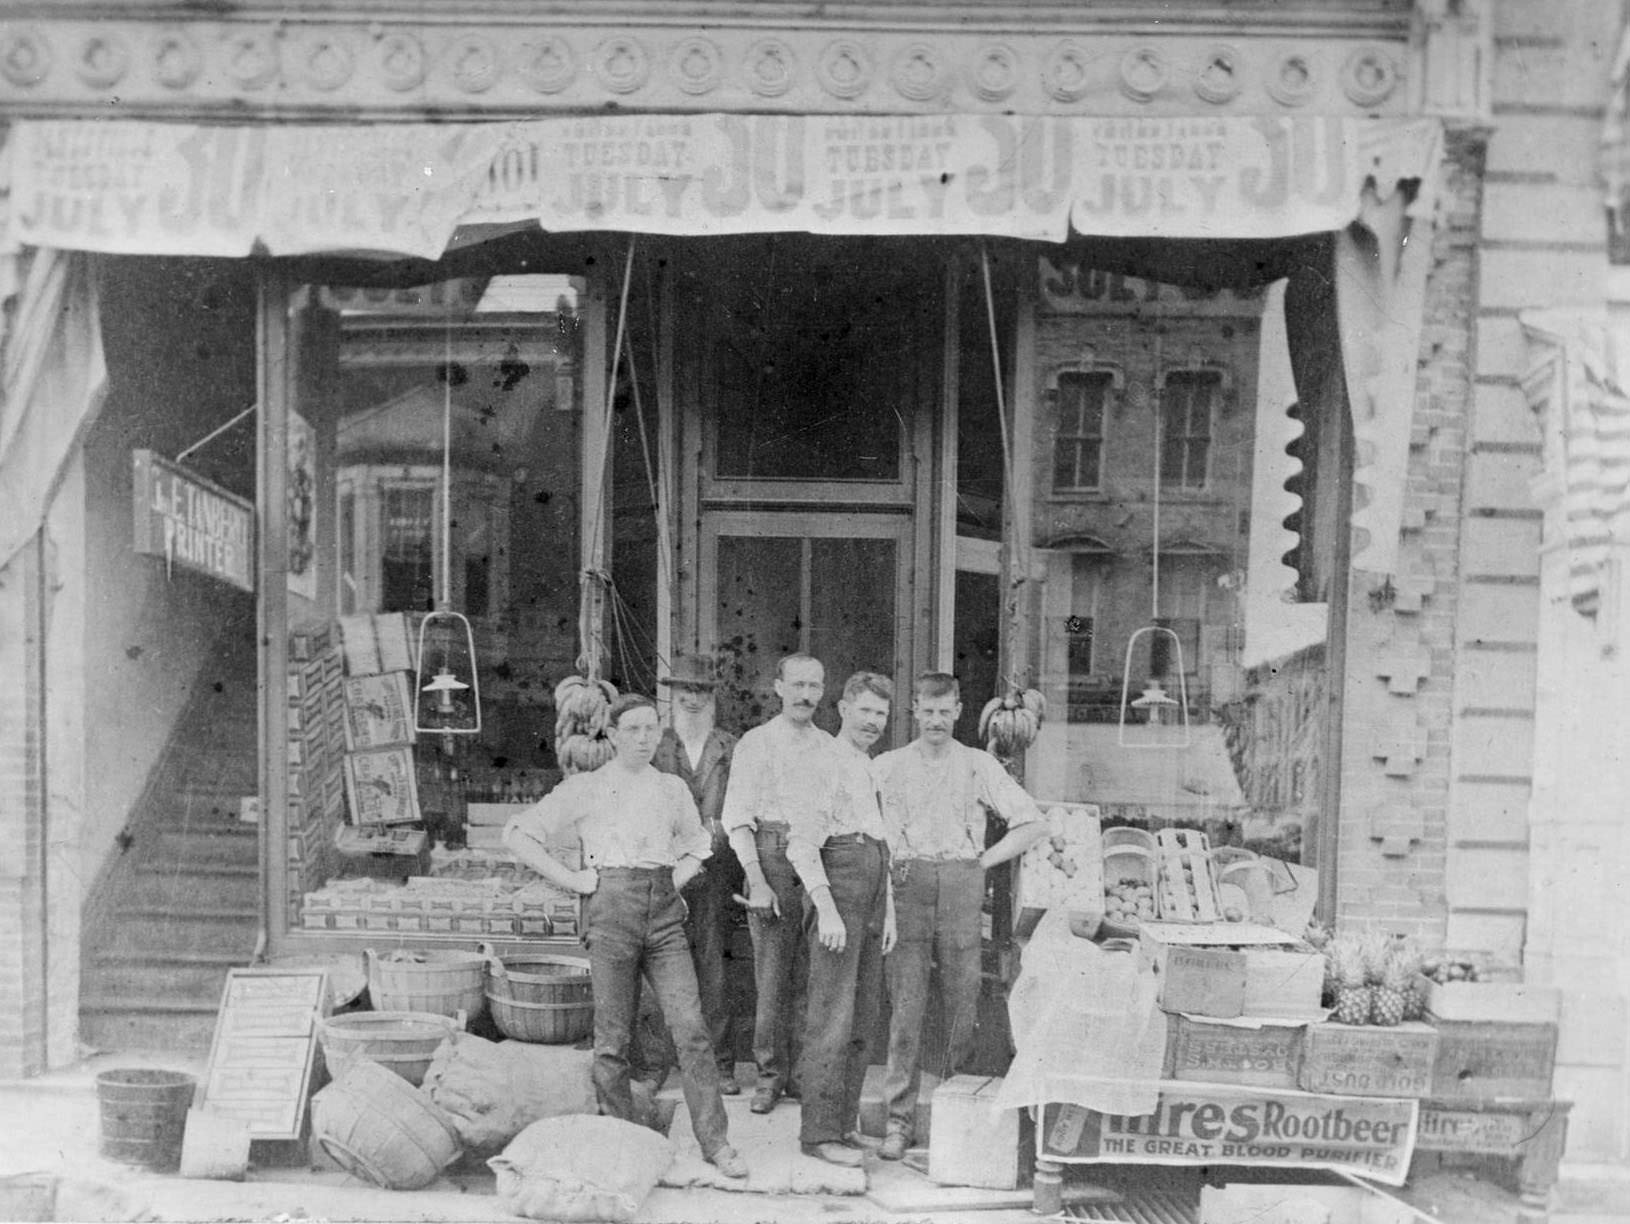 Five men outside their grocery store on River Street in Janesville, 1890.